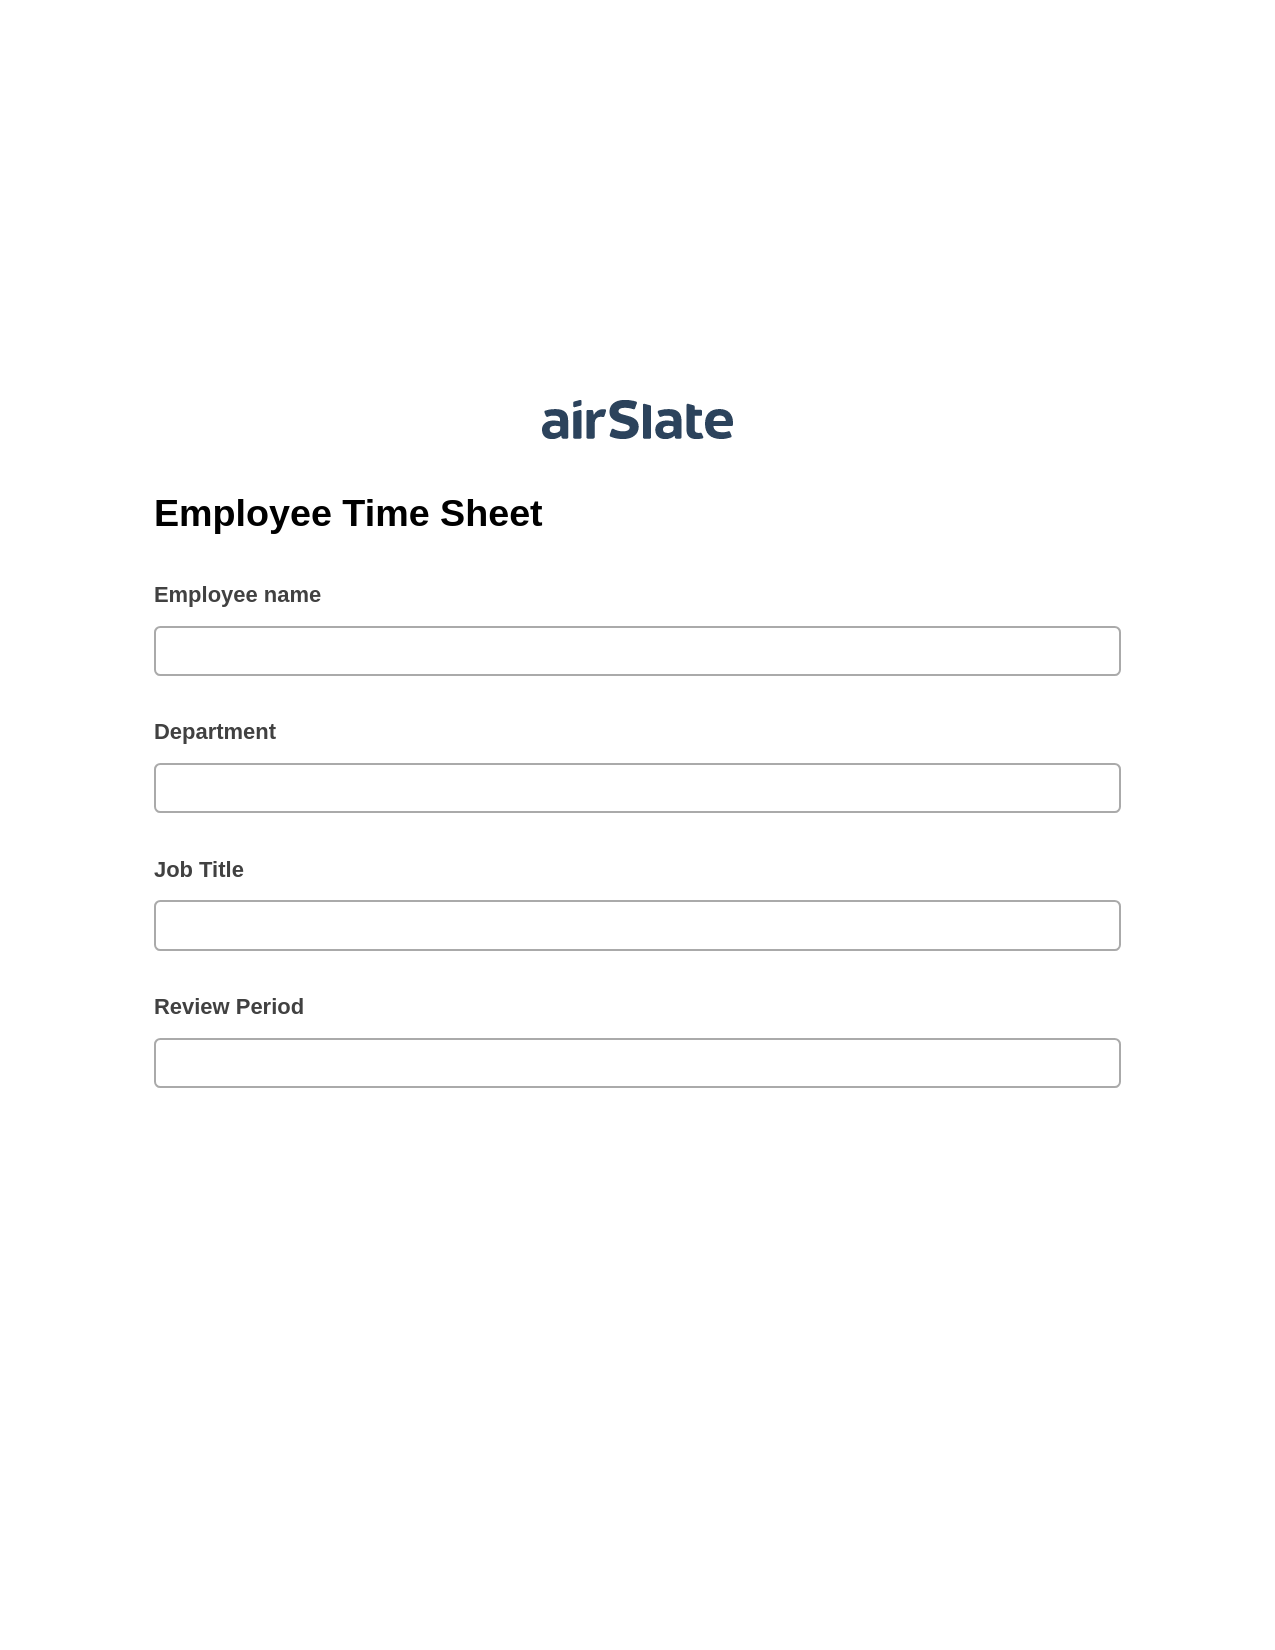 Multirole Employee Time Sheet Pre-fill Dropdowns from Airtable, Jira Bot, Export to NetSuite Bot